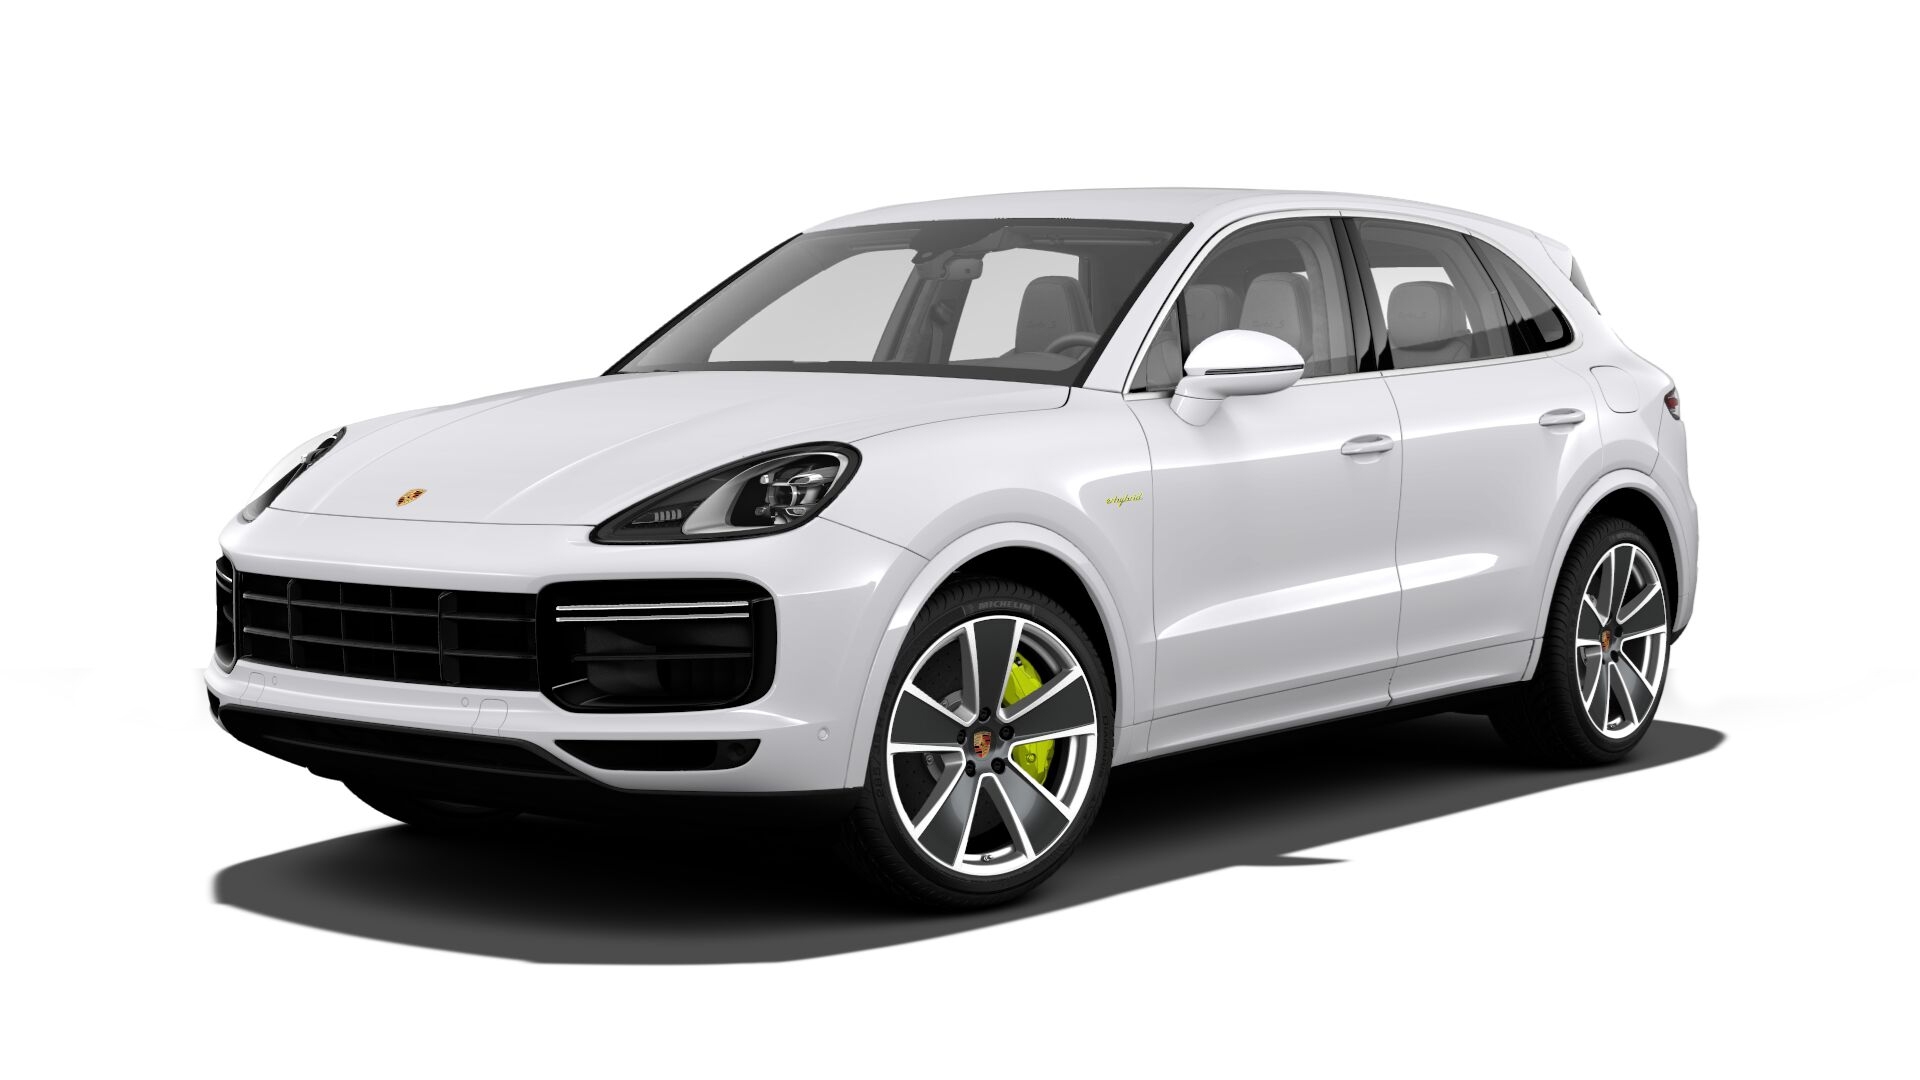 2022 Porsche Cayenne Turbo S E-Hybrid Full Specs, Features and Price |  CarBuzz